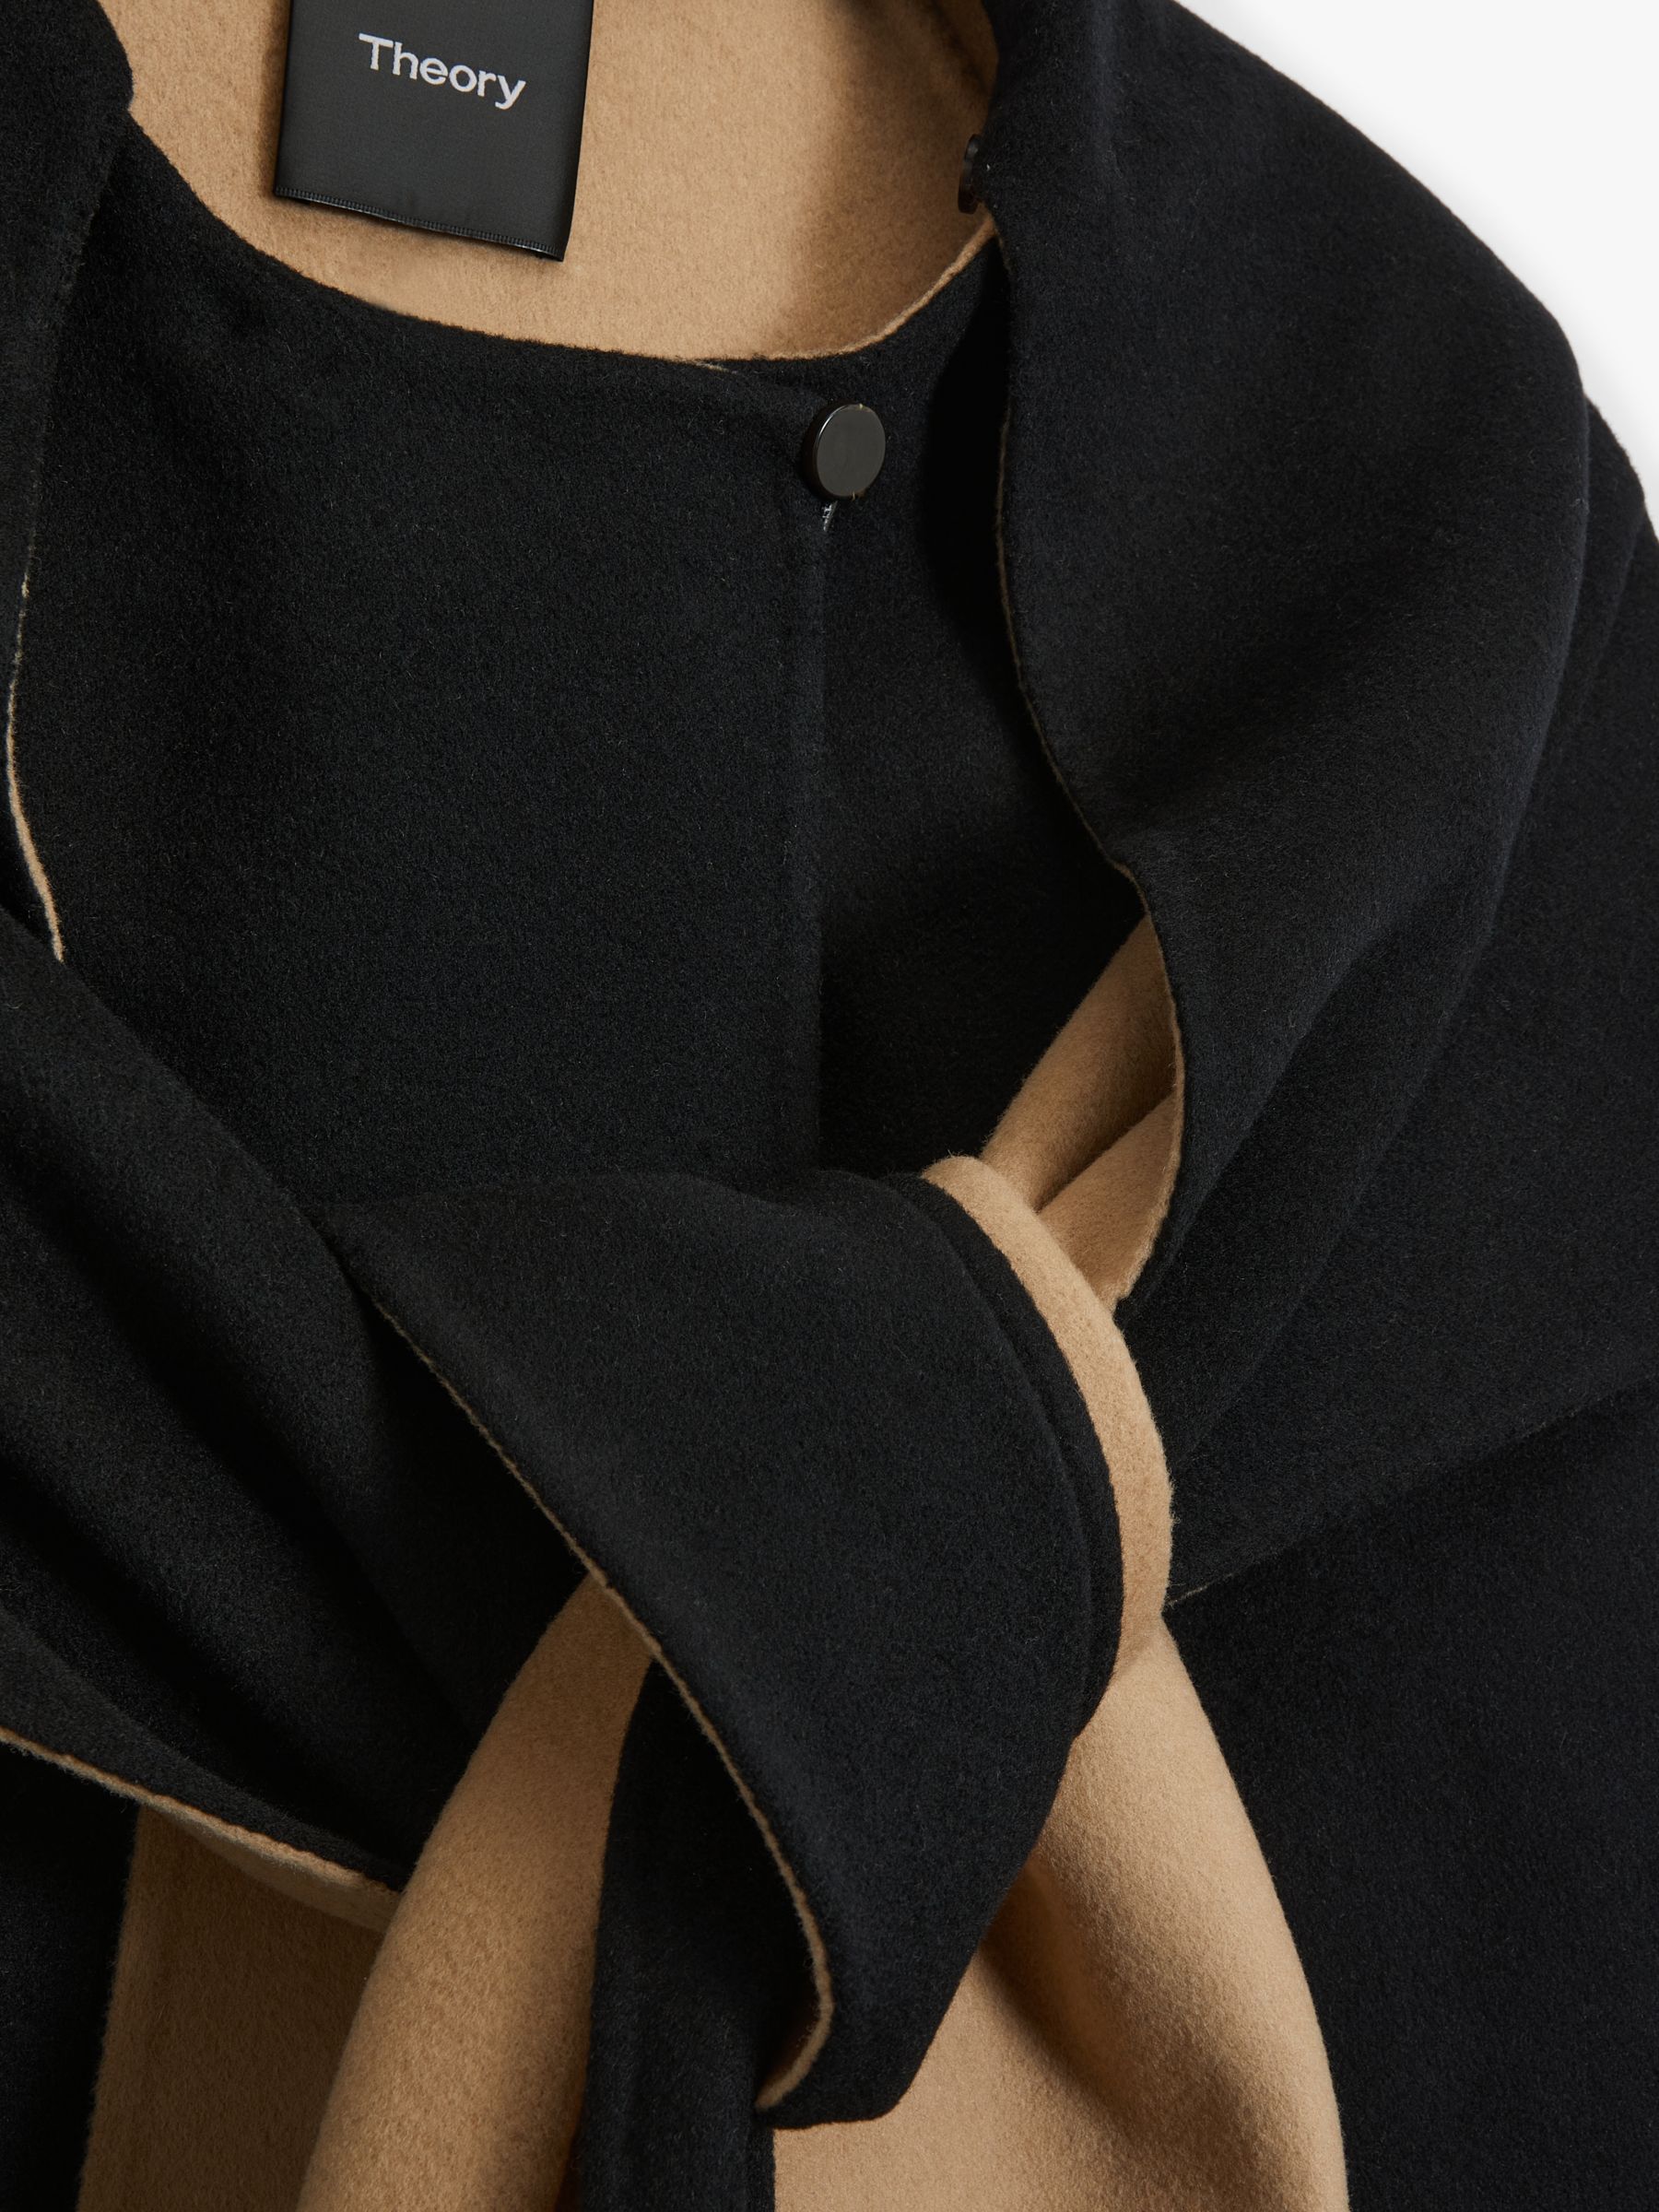 Theory Wool Cashmere Blend Scarf Coat, Black at John Lewis & Partners